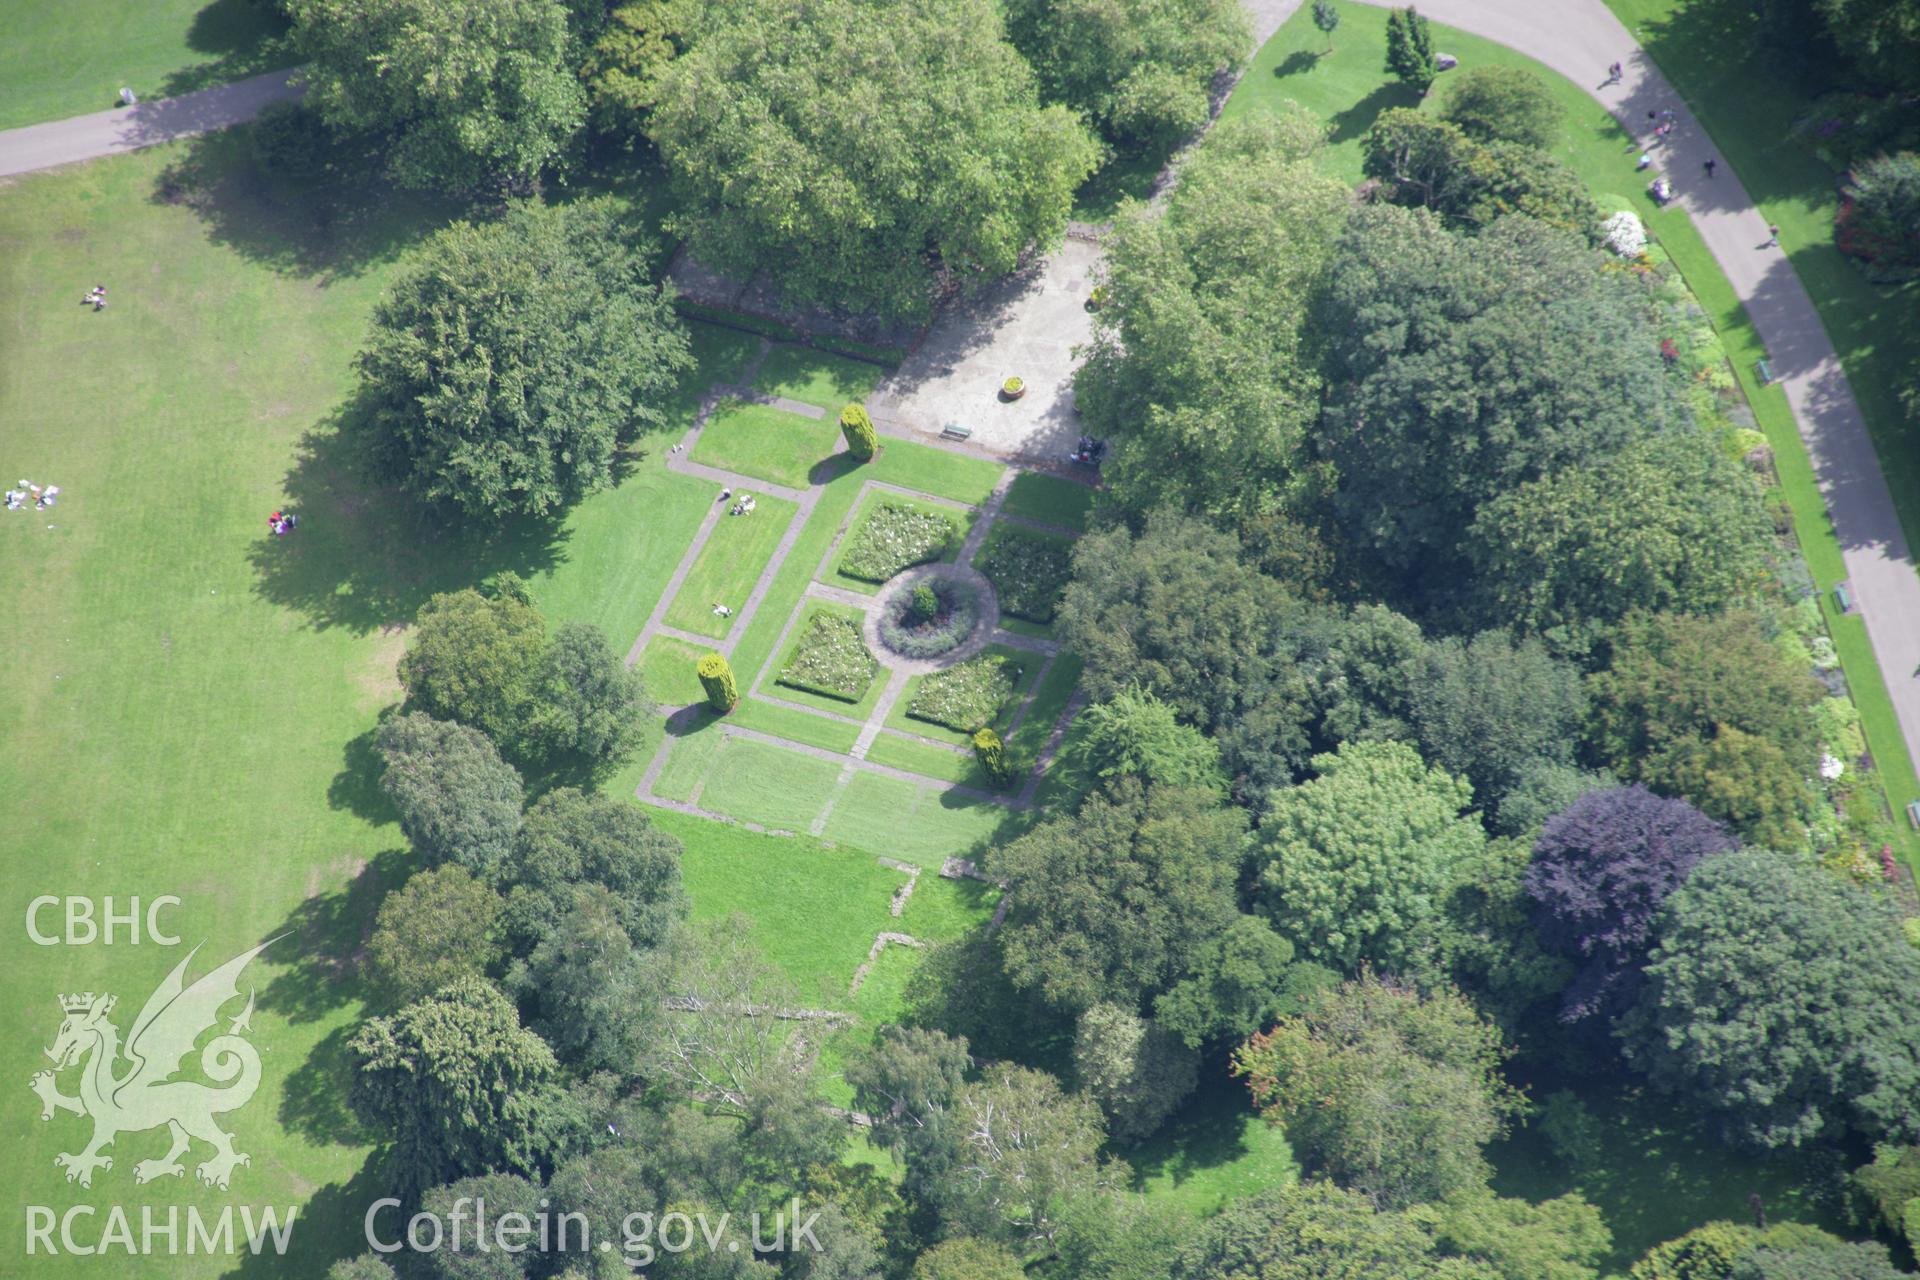 RCAHMW colour oblique aerial photograph of Blackfriars Priory (Dominican), Bute Park. Taken on 30 July 2007 by Toby Driver